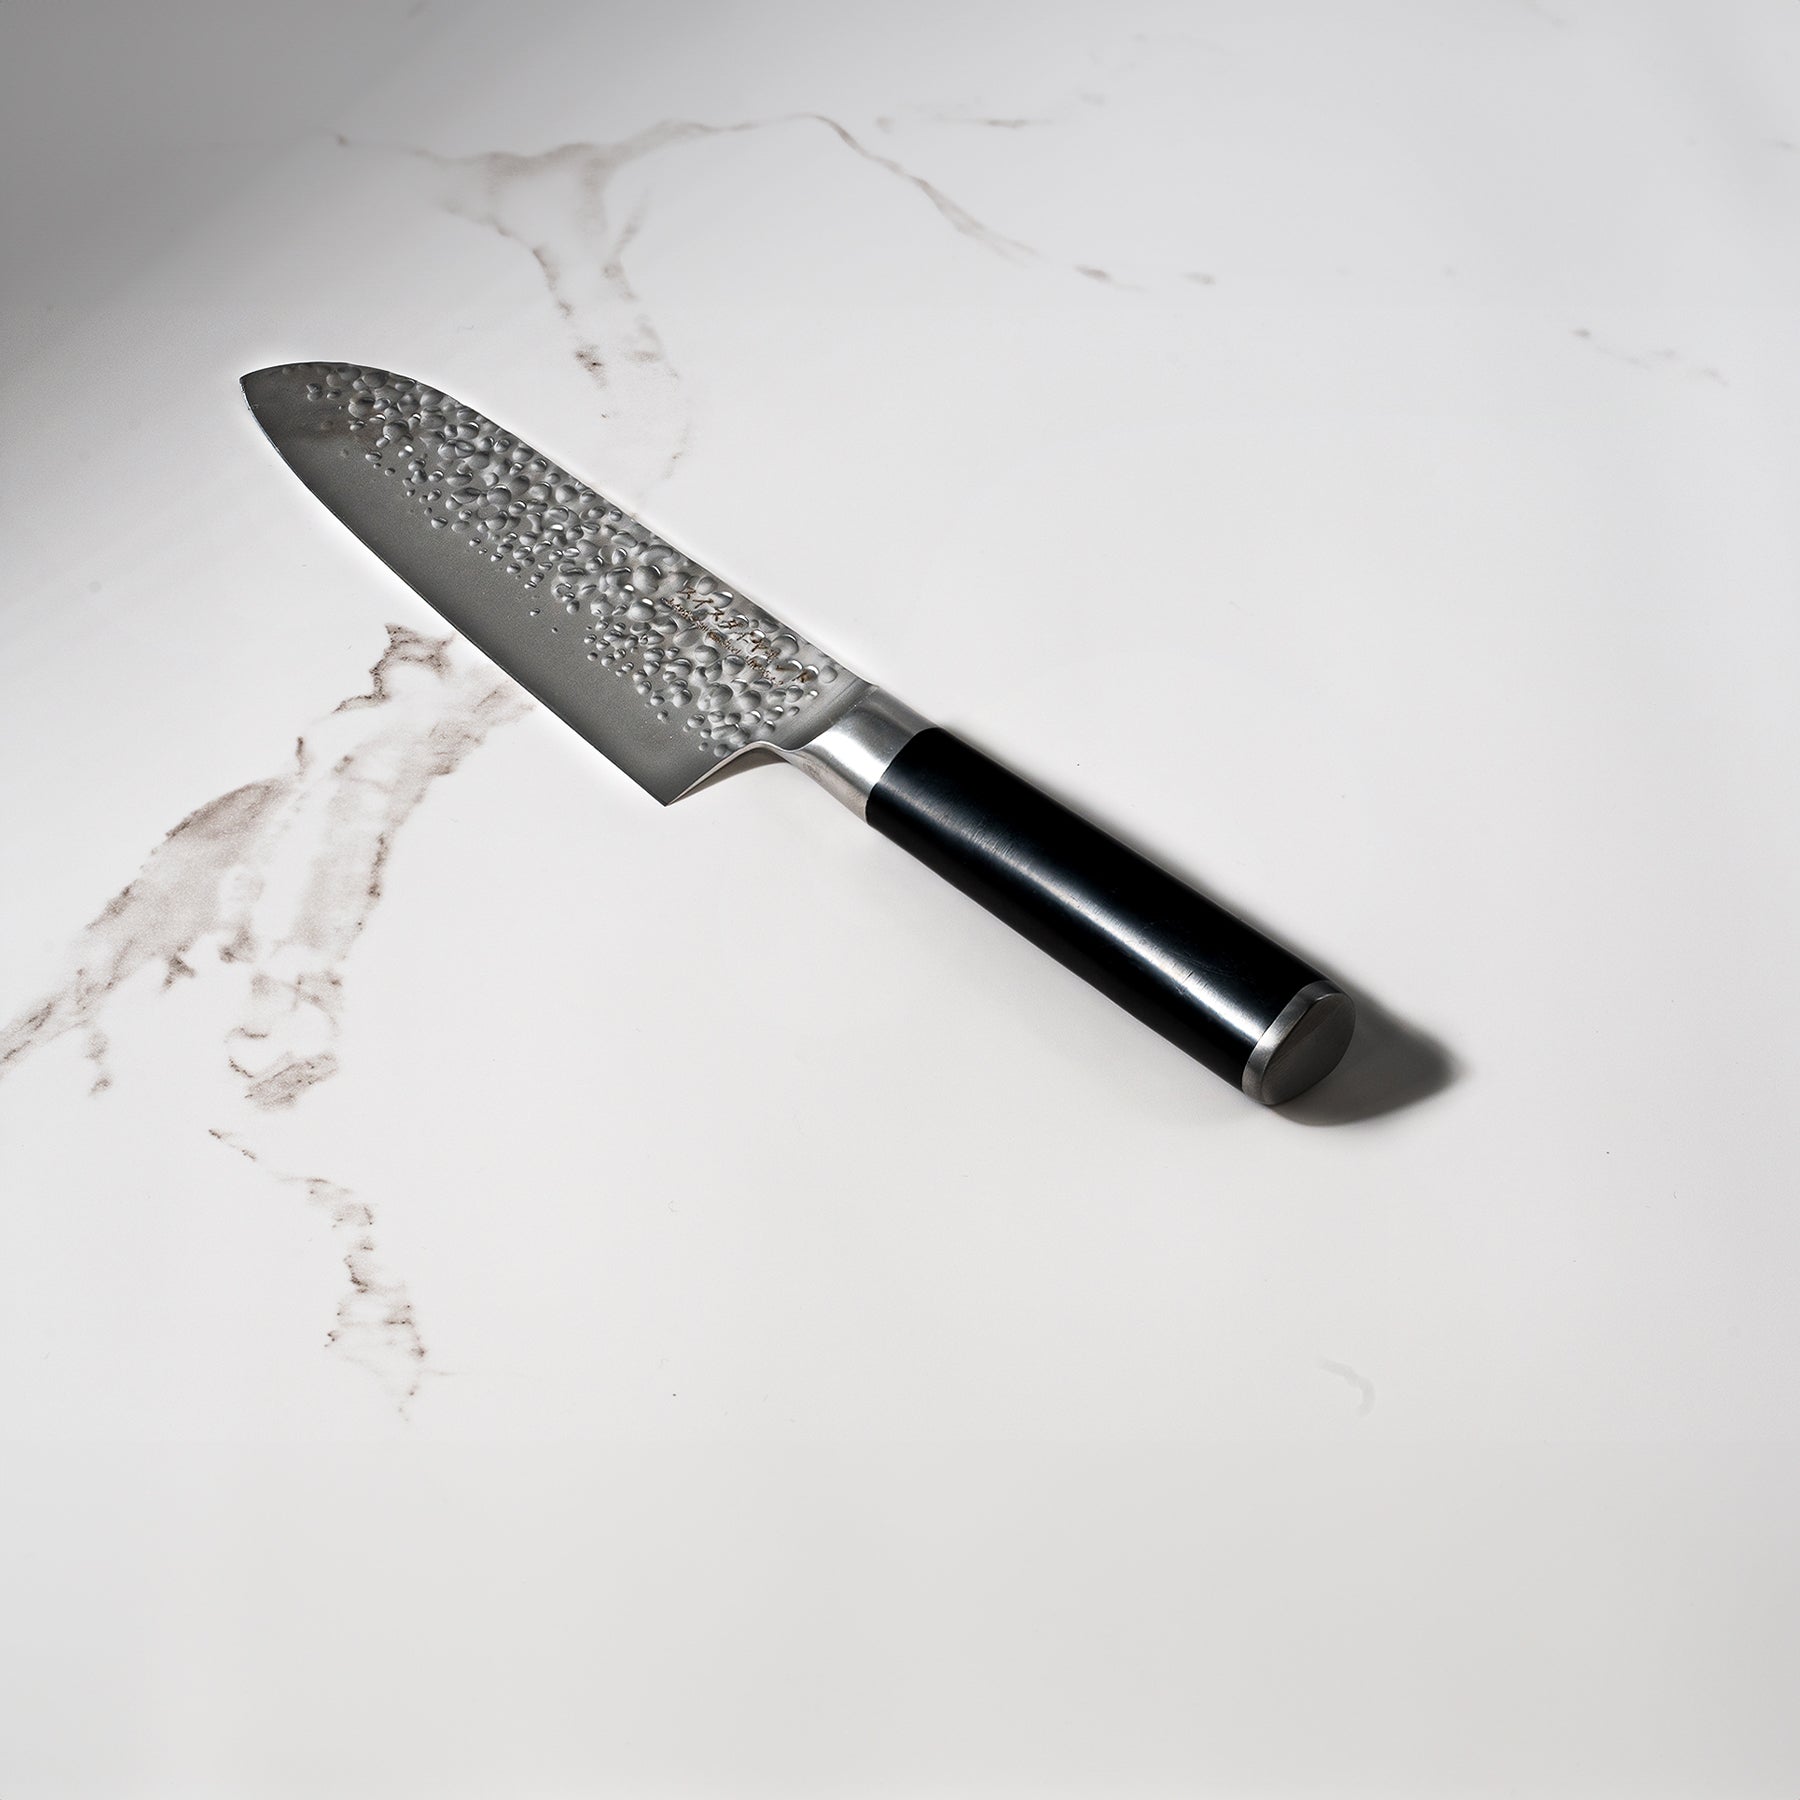 7" Hammered Santoku Knife on Kitchen white marble counter top